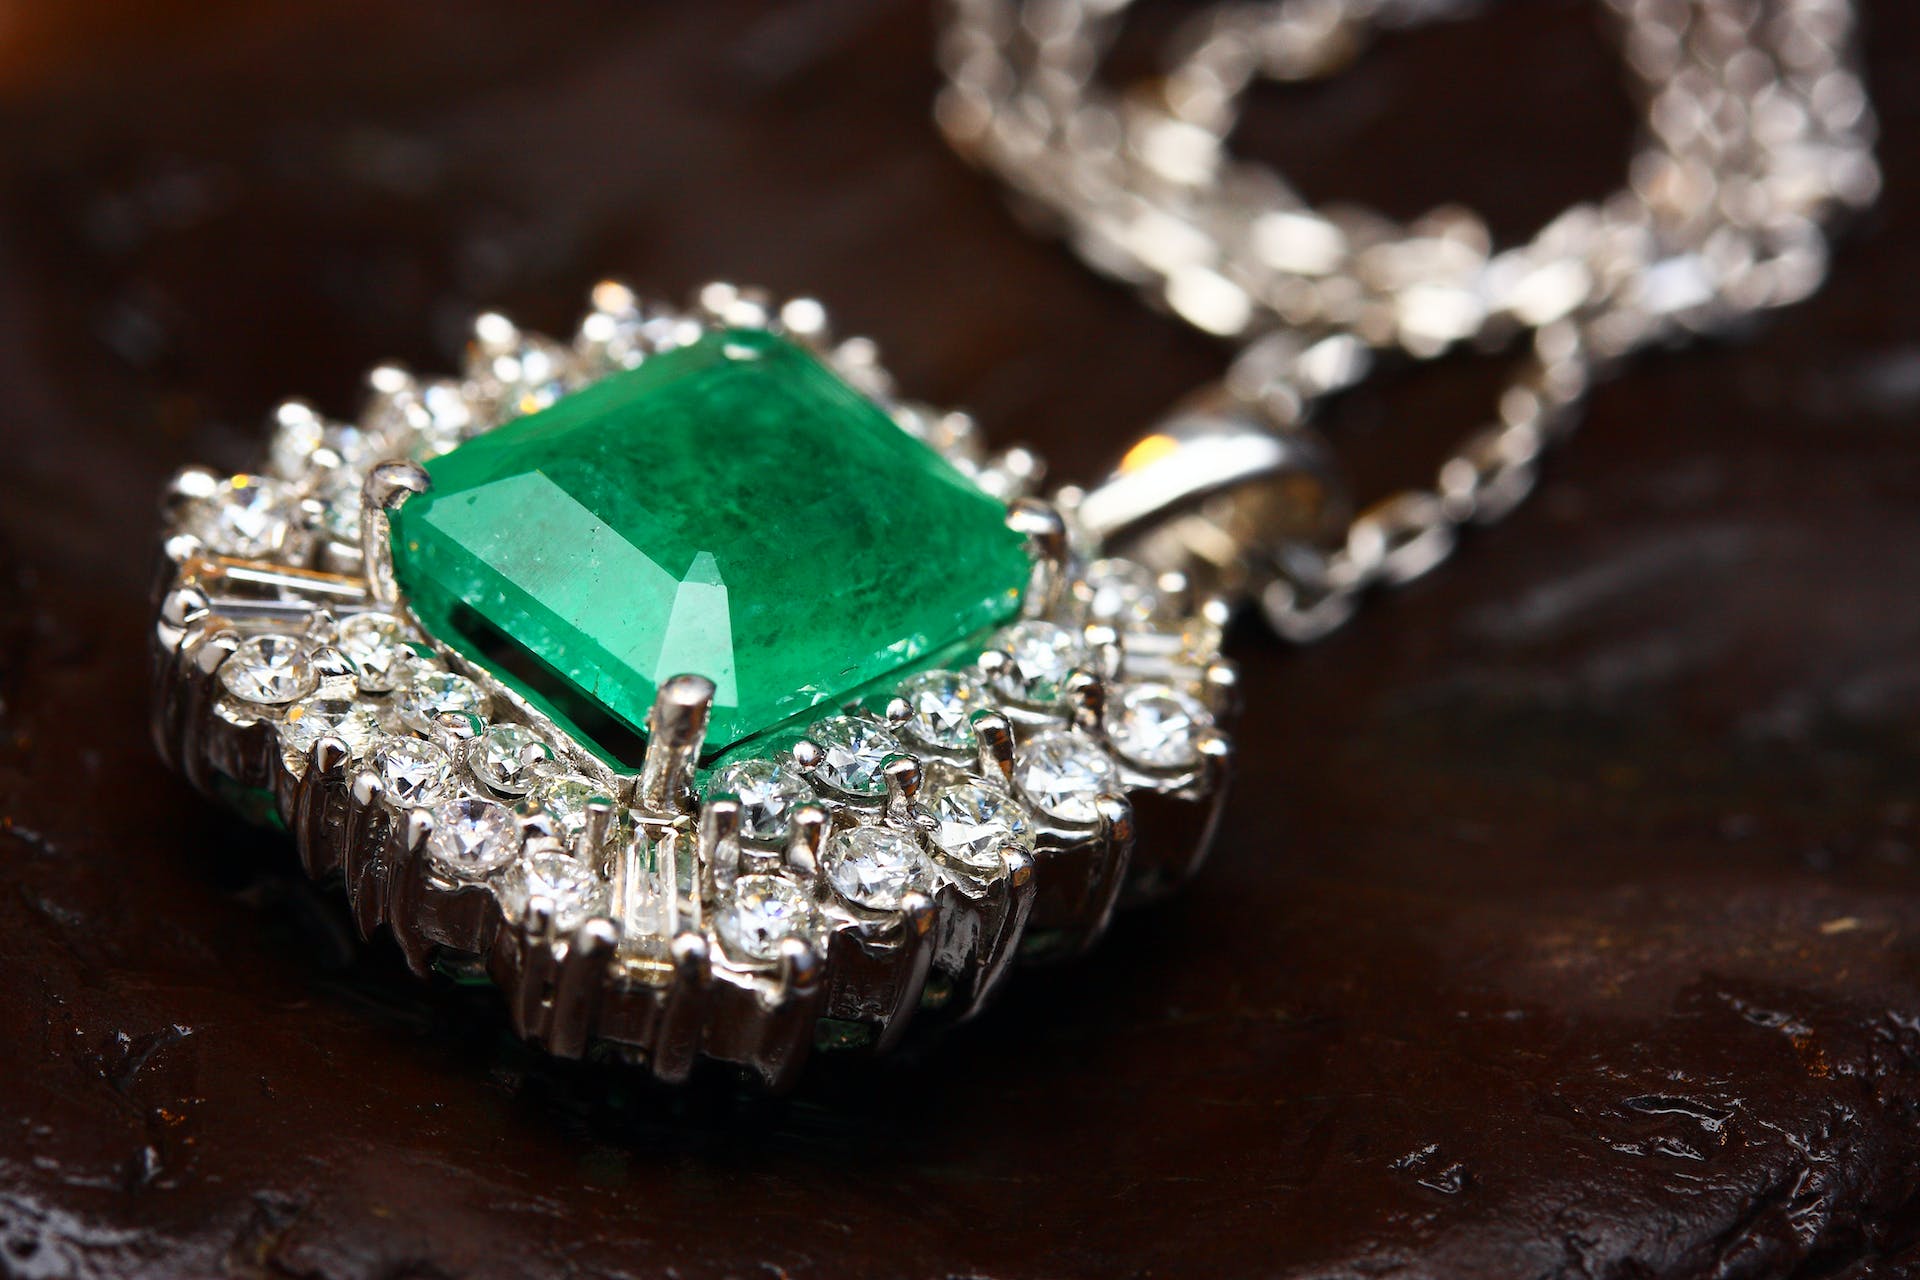 Silver-colored pendant with a green gemstone | Source: Pexels